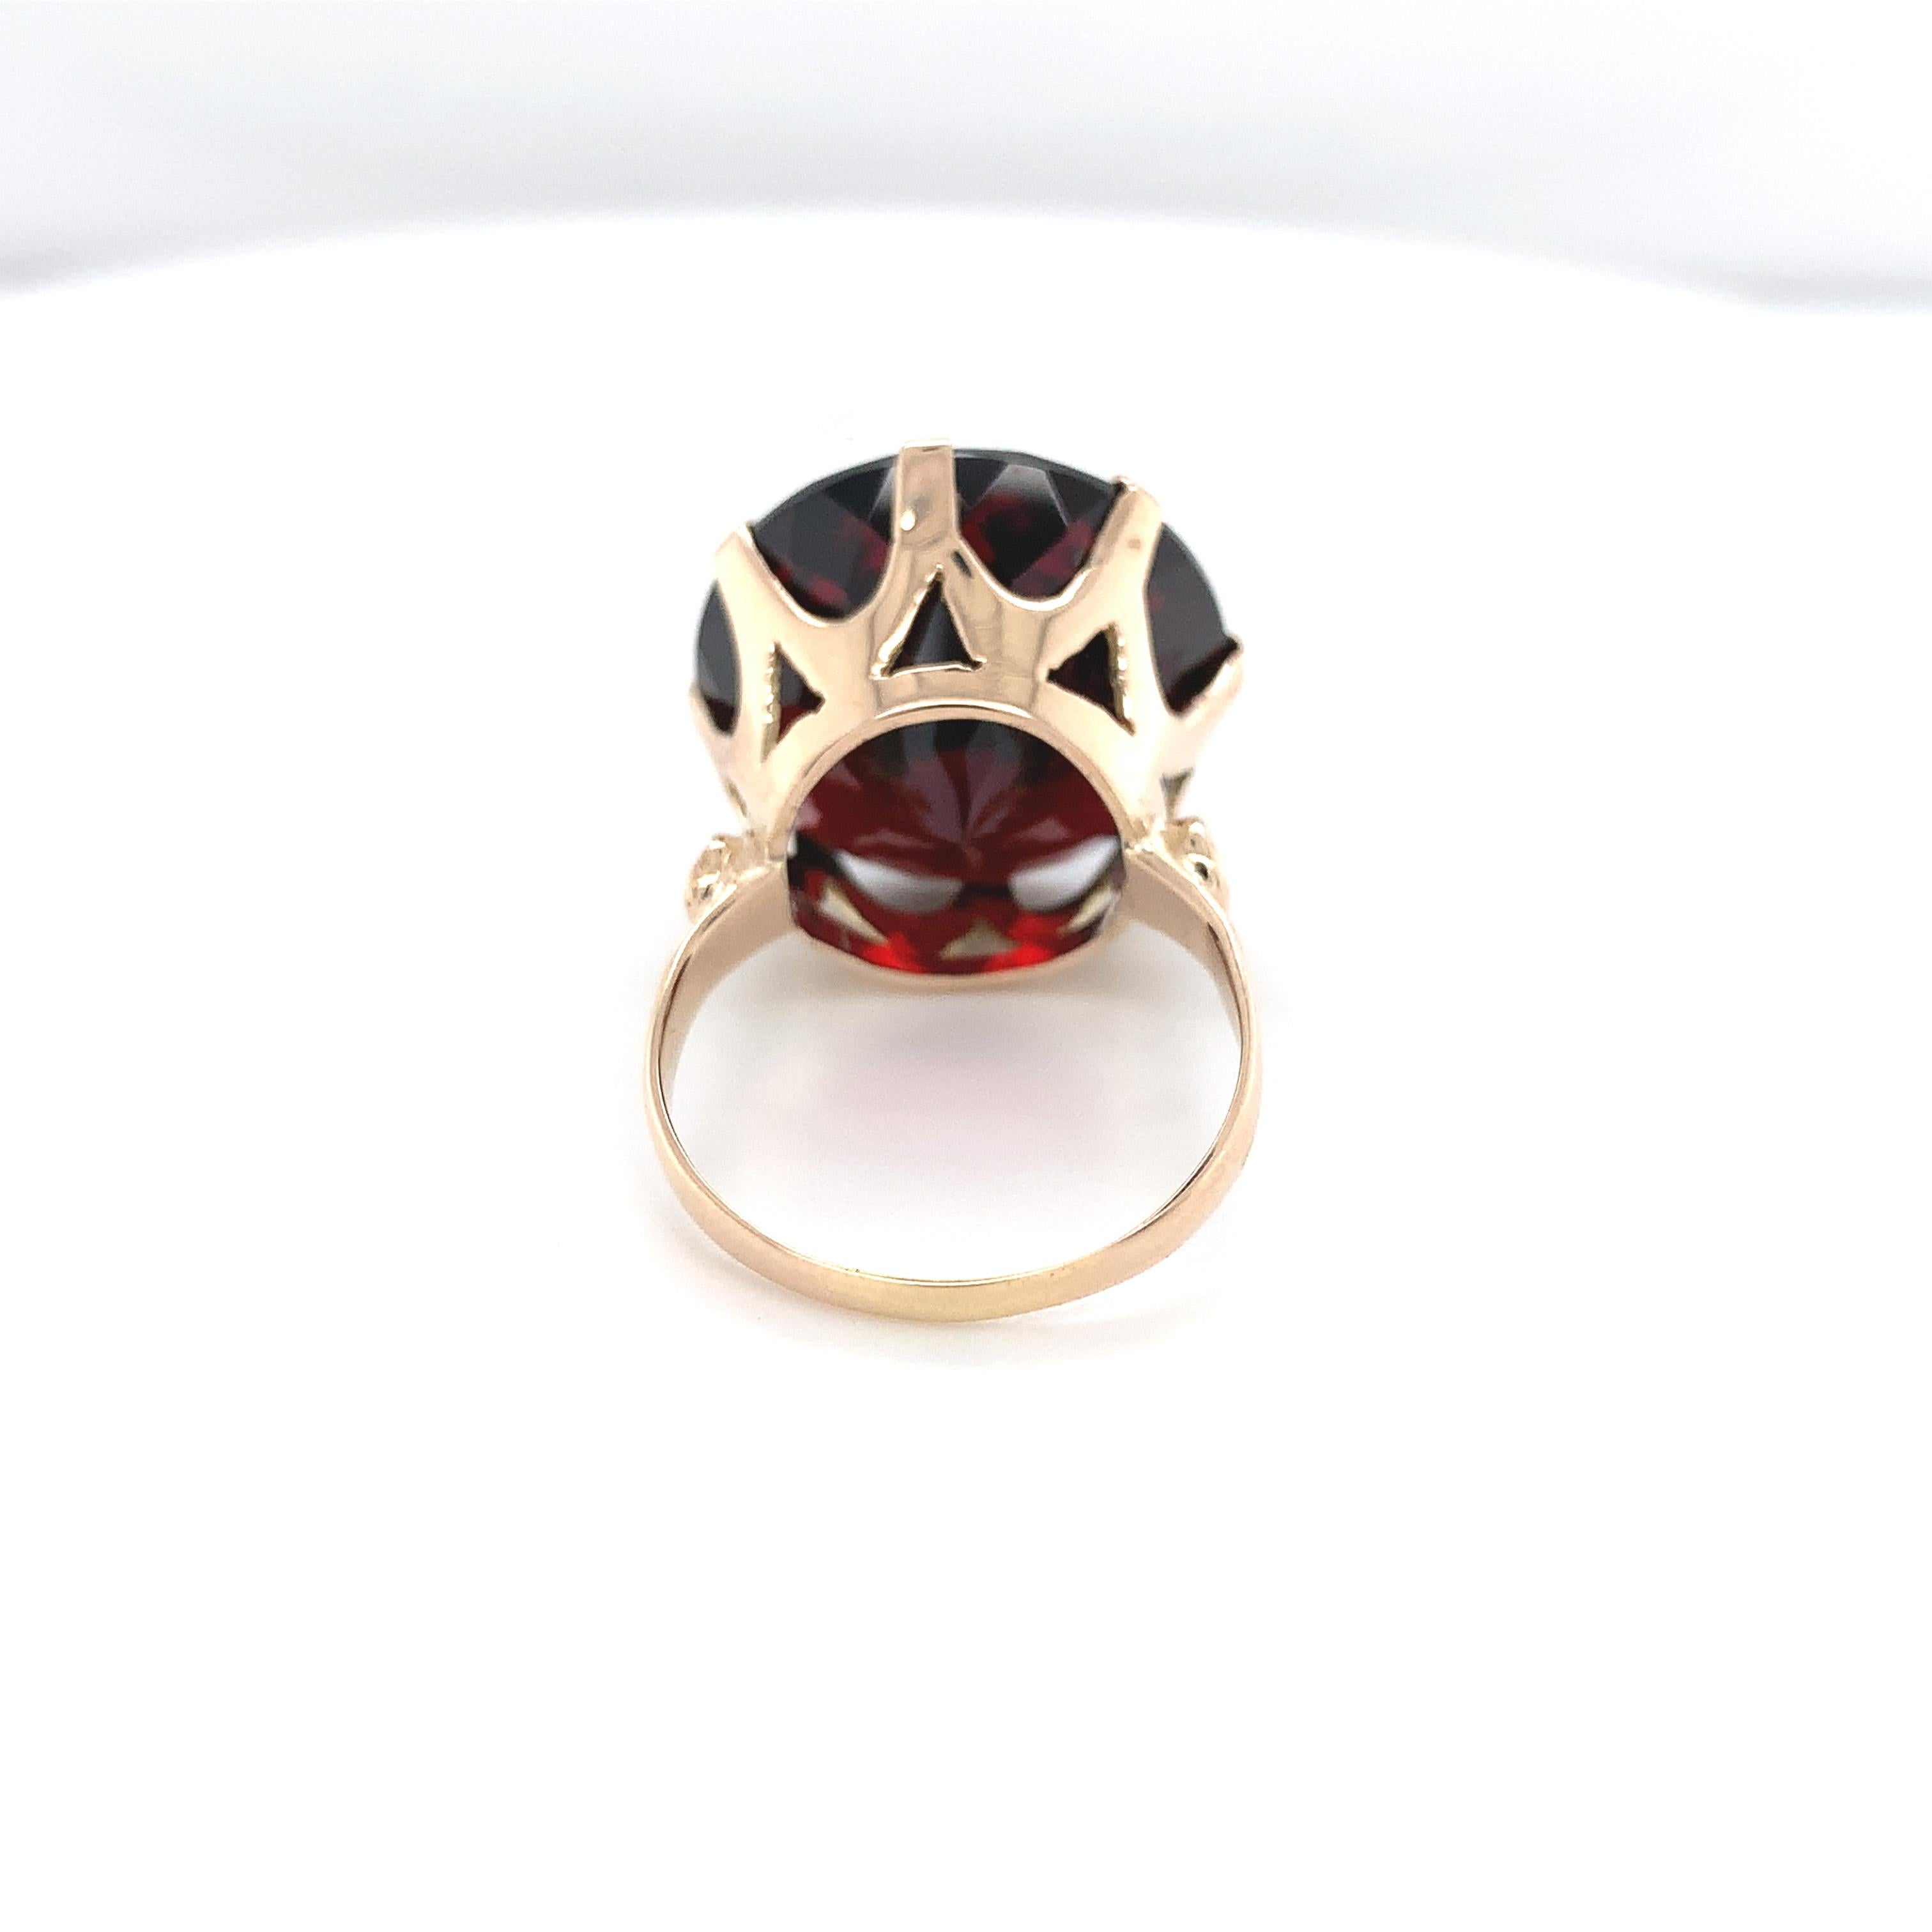 Women's 14K Yellow Gold Ring with a Huge 27 carat Round Garnet For Sale